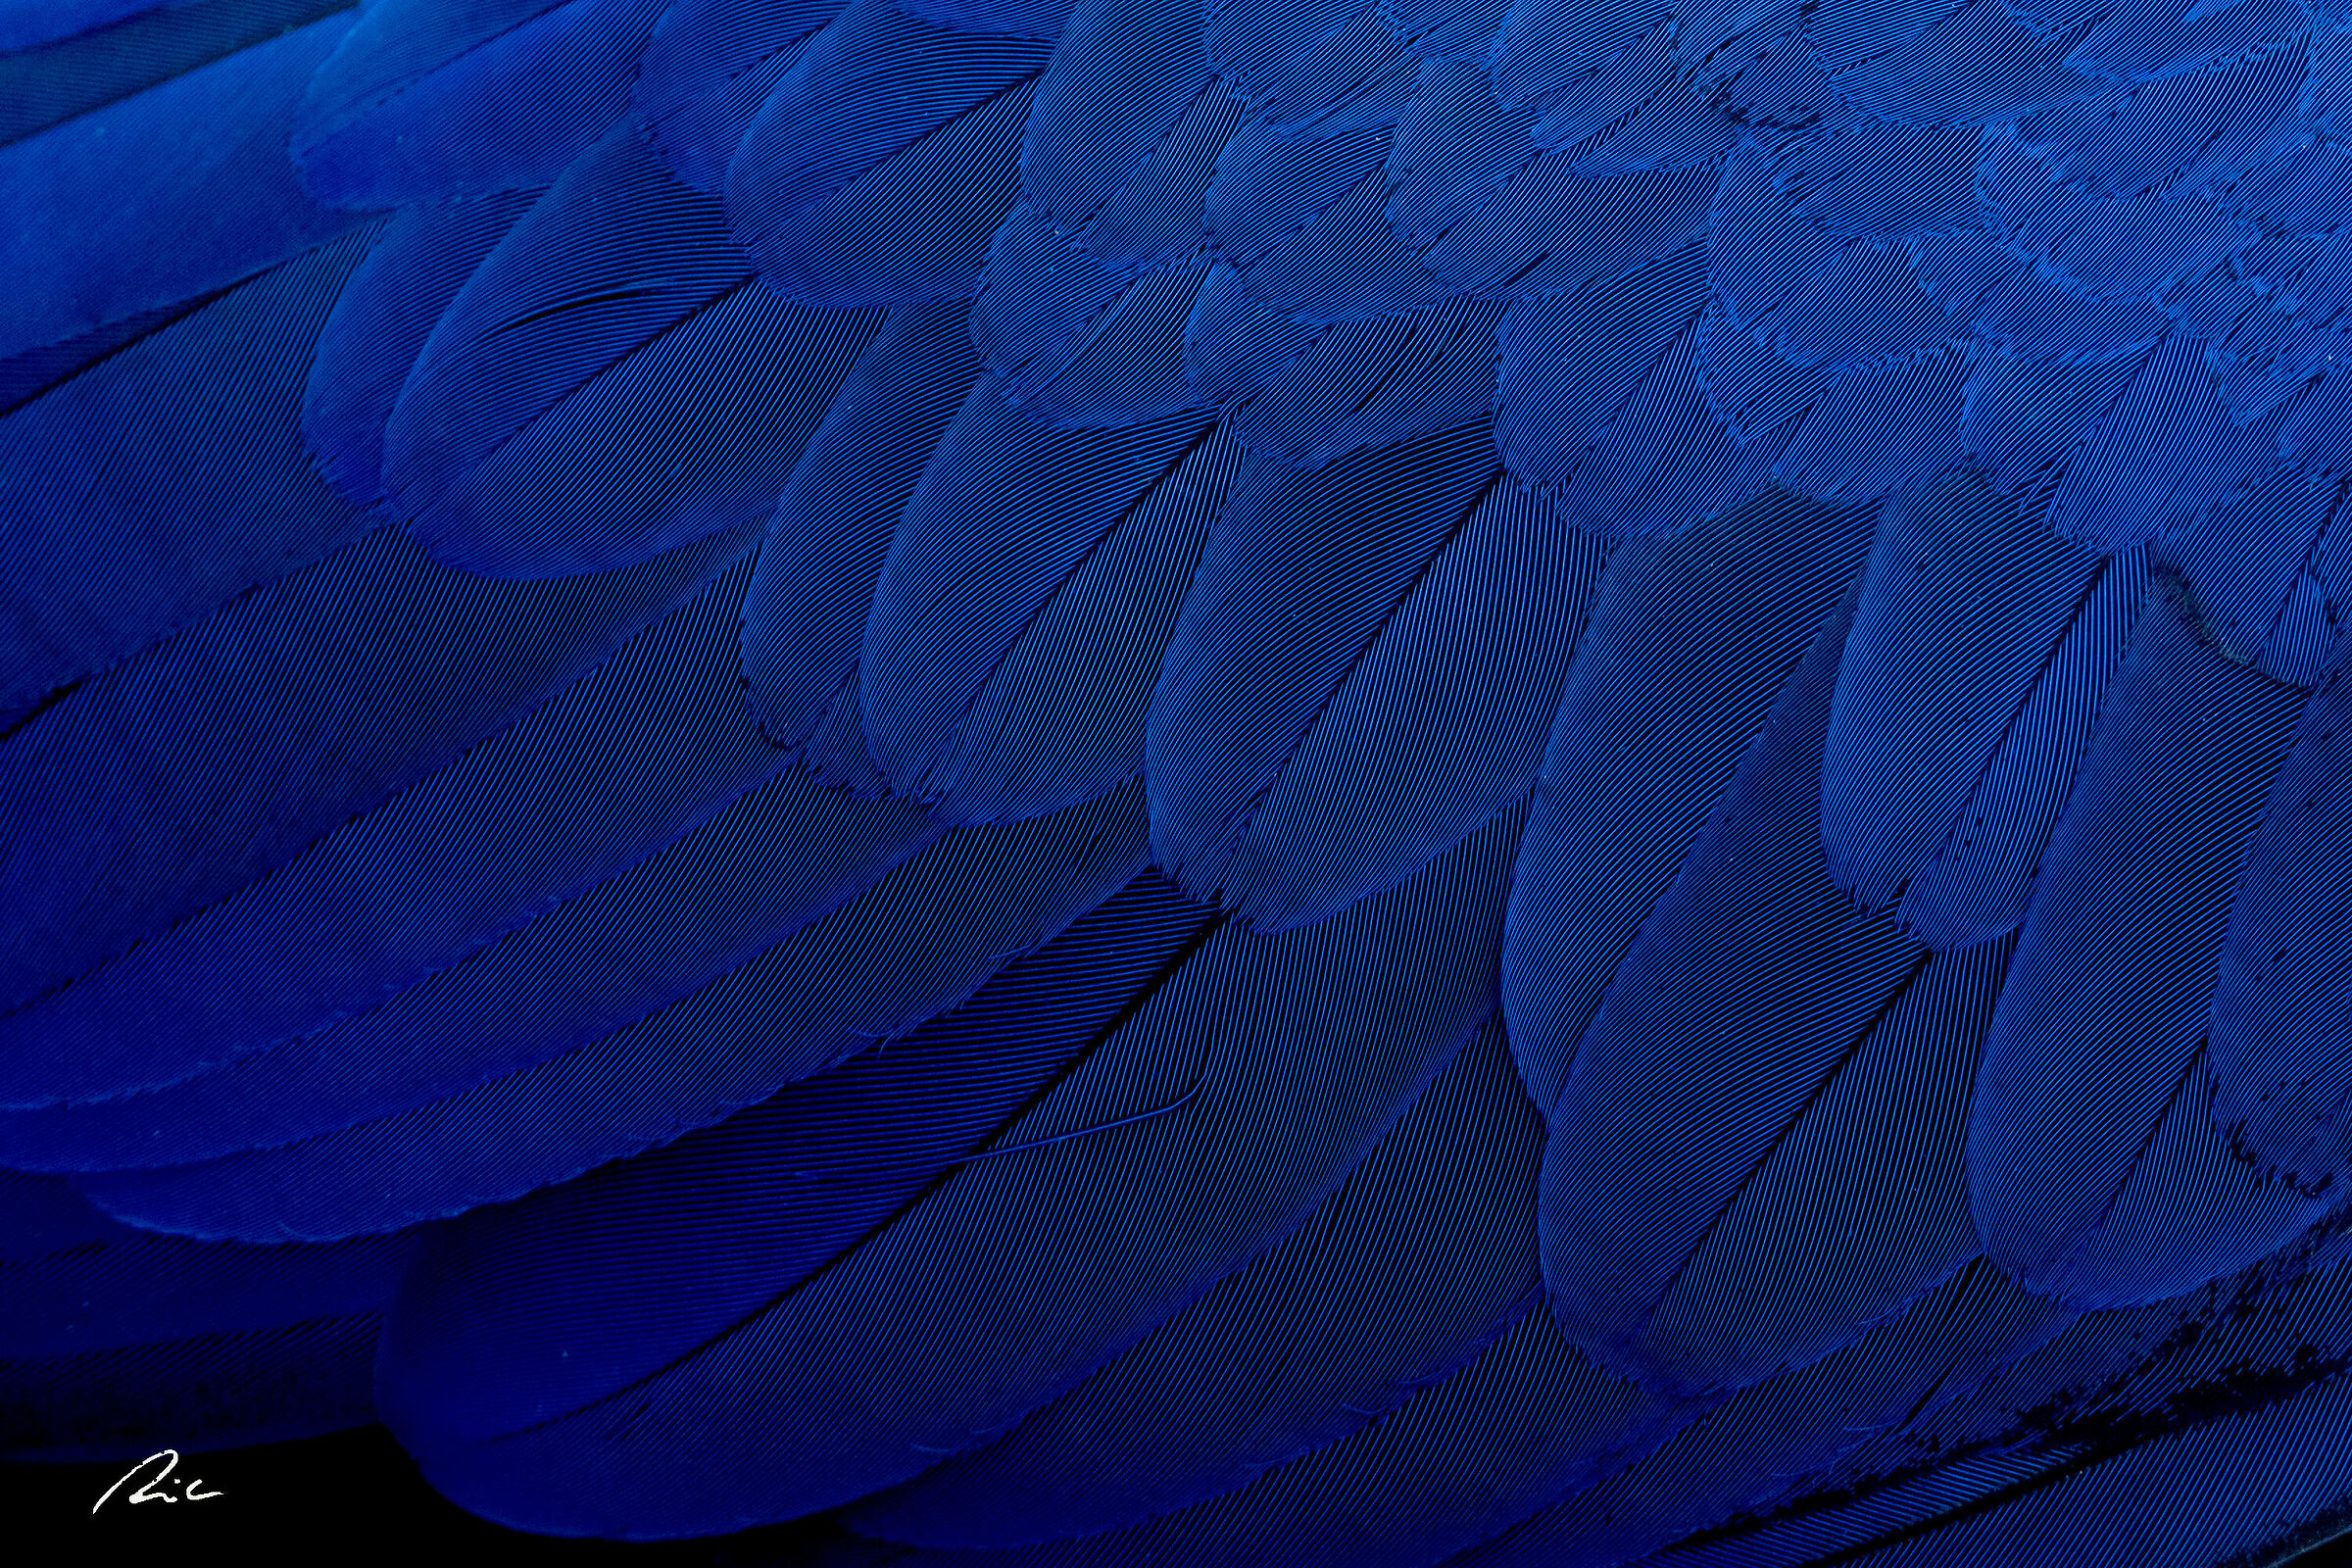 Feathers...